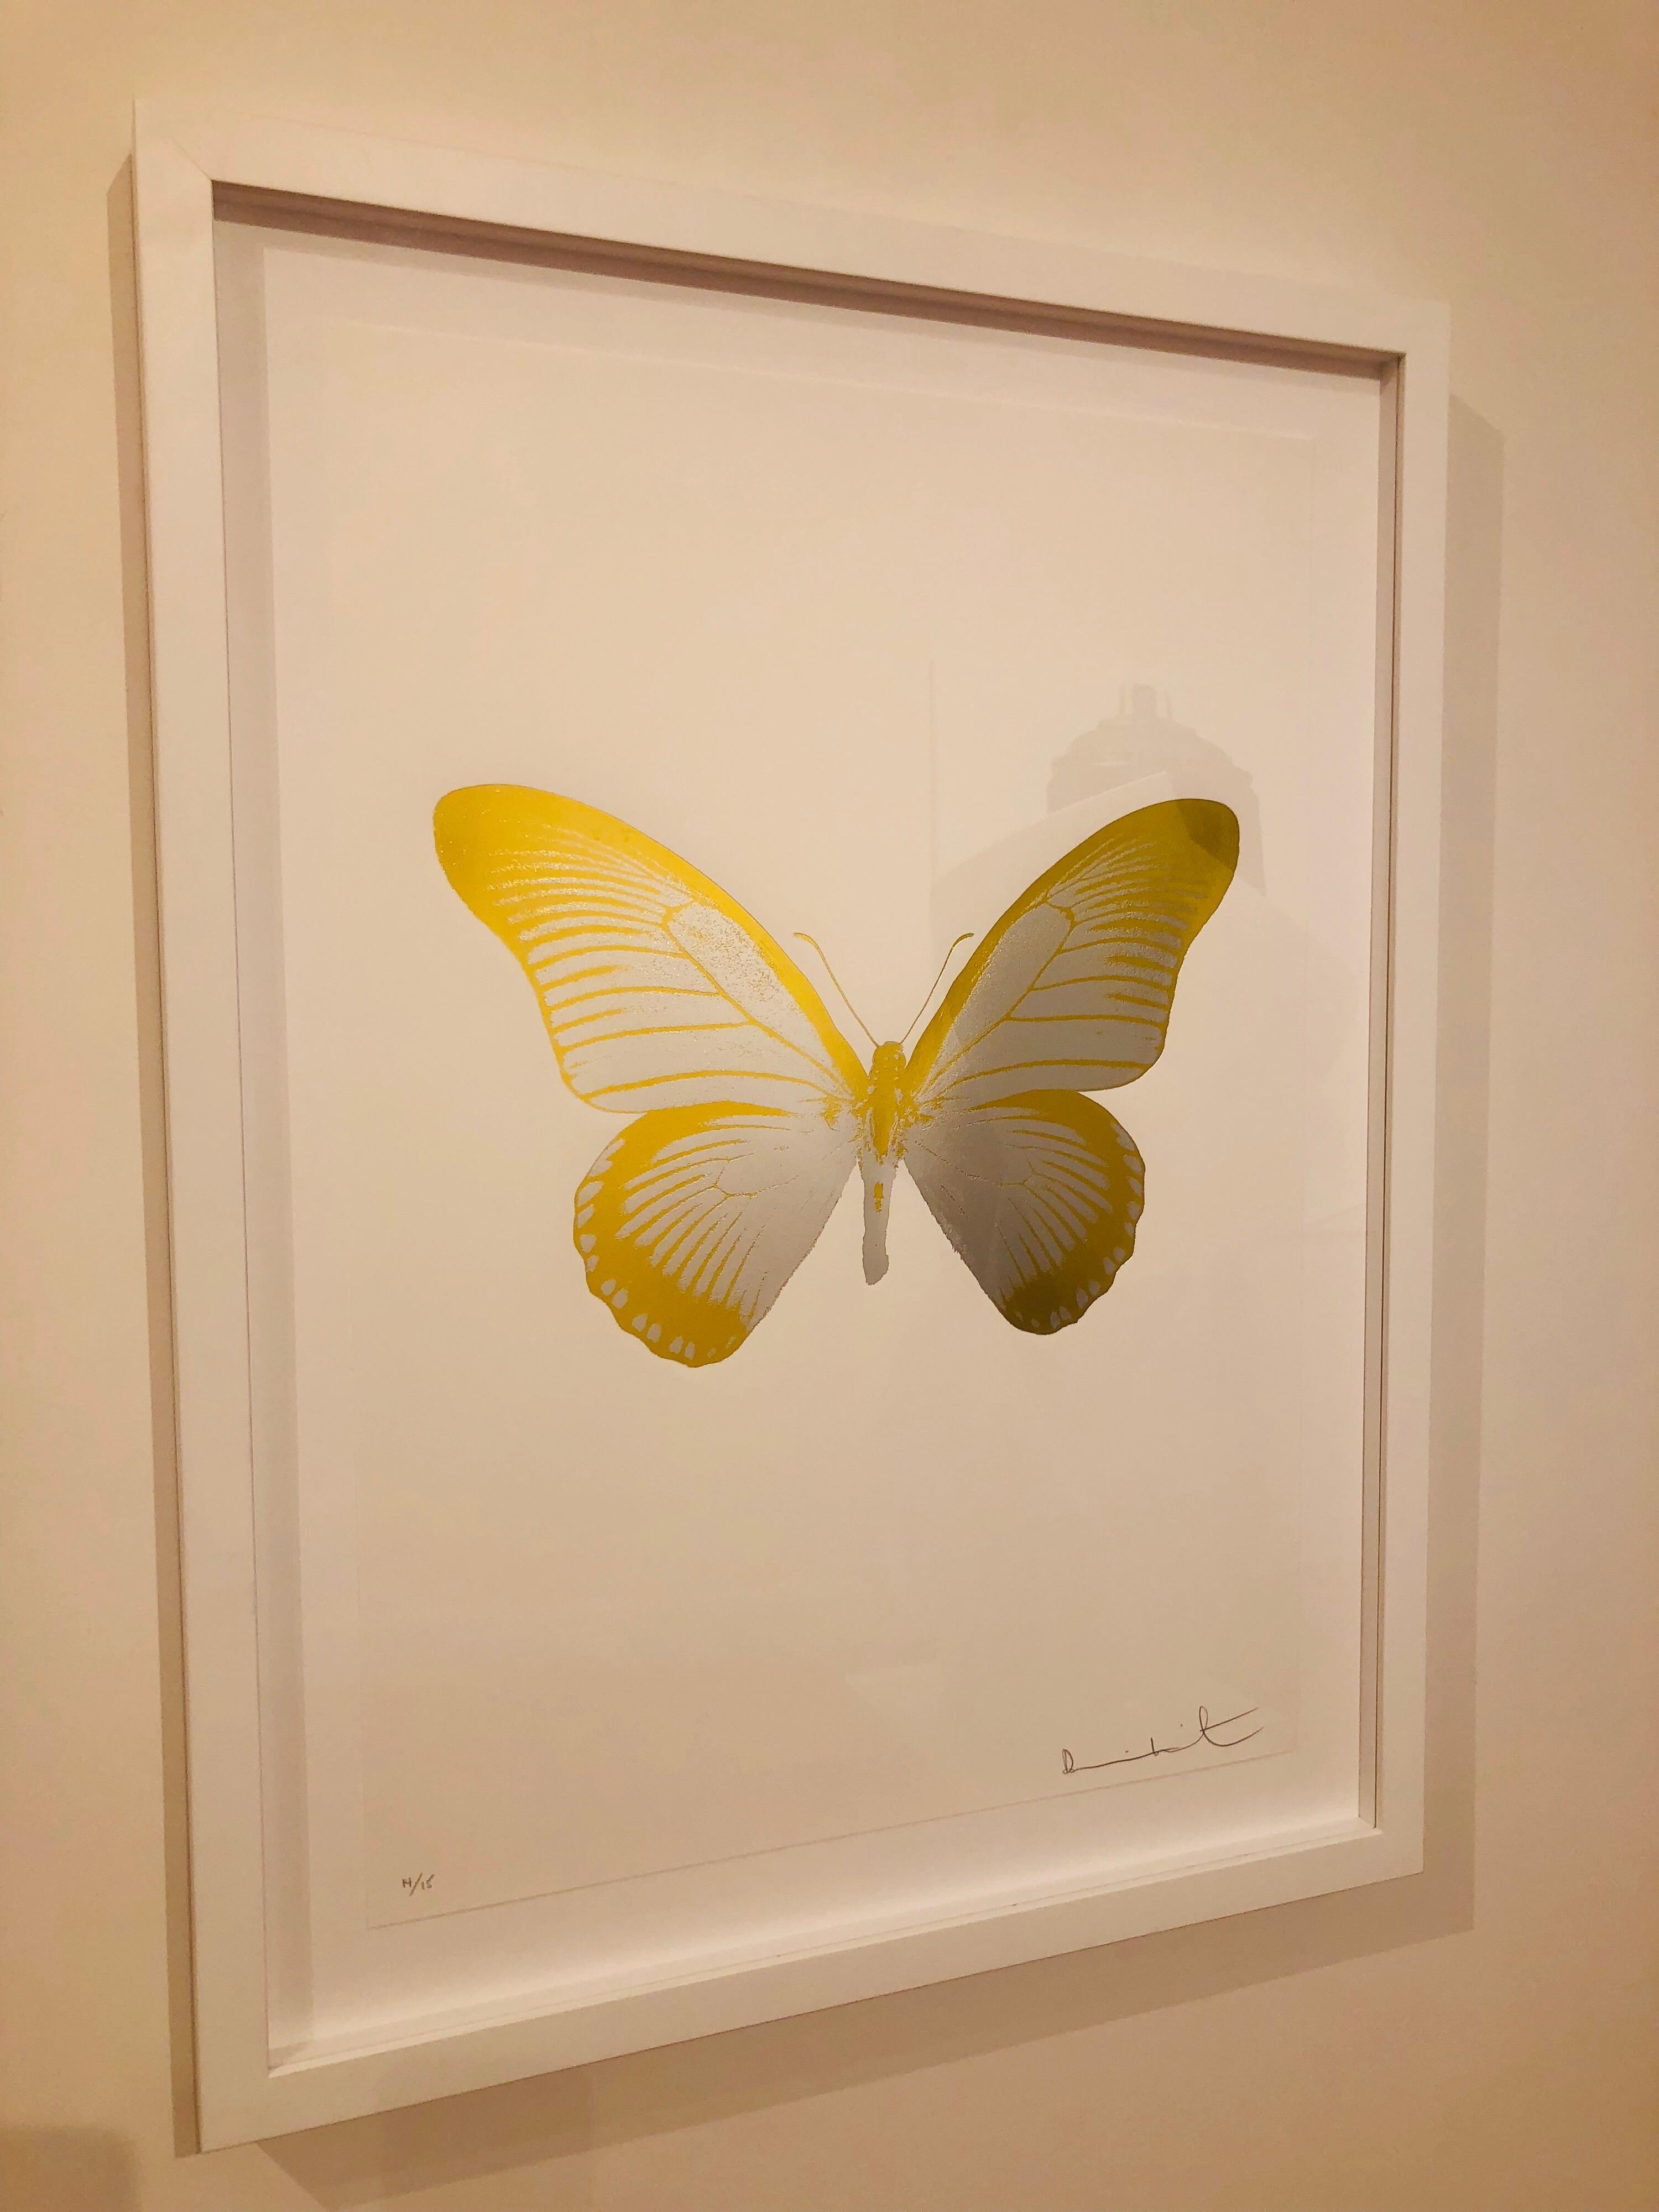 The Souls IV - Contemporary Print by Damien Hirst